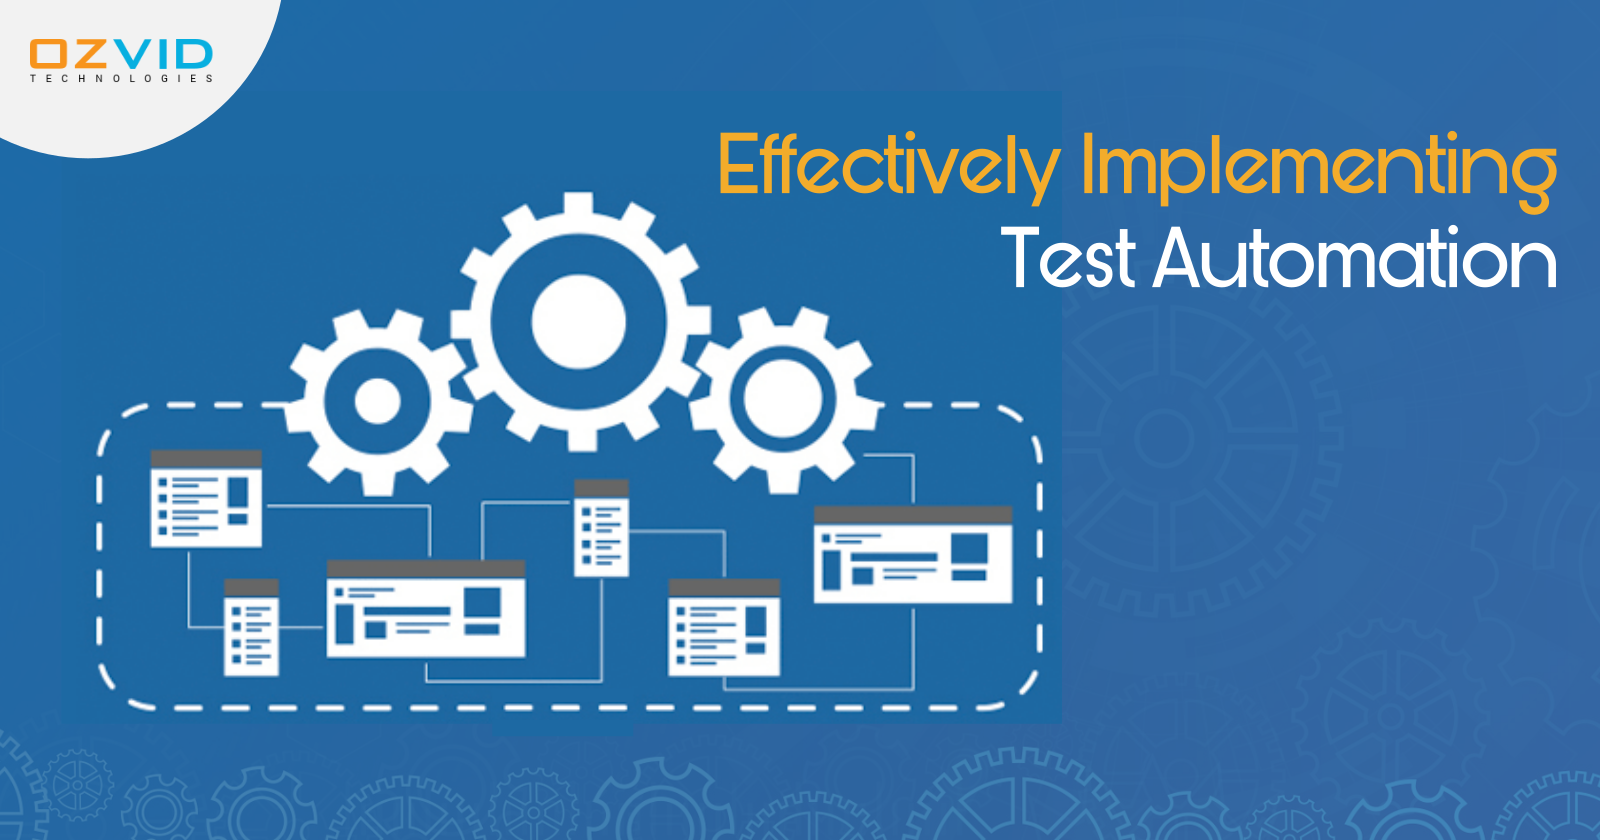 Effectively Implementing Test Automation to Speed the Testing Process